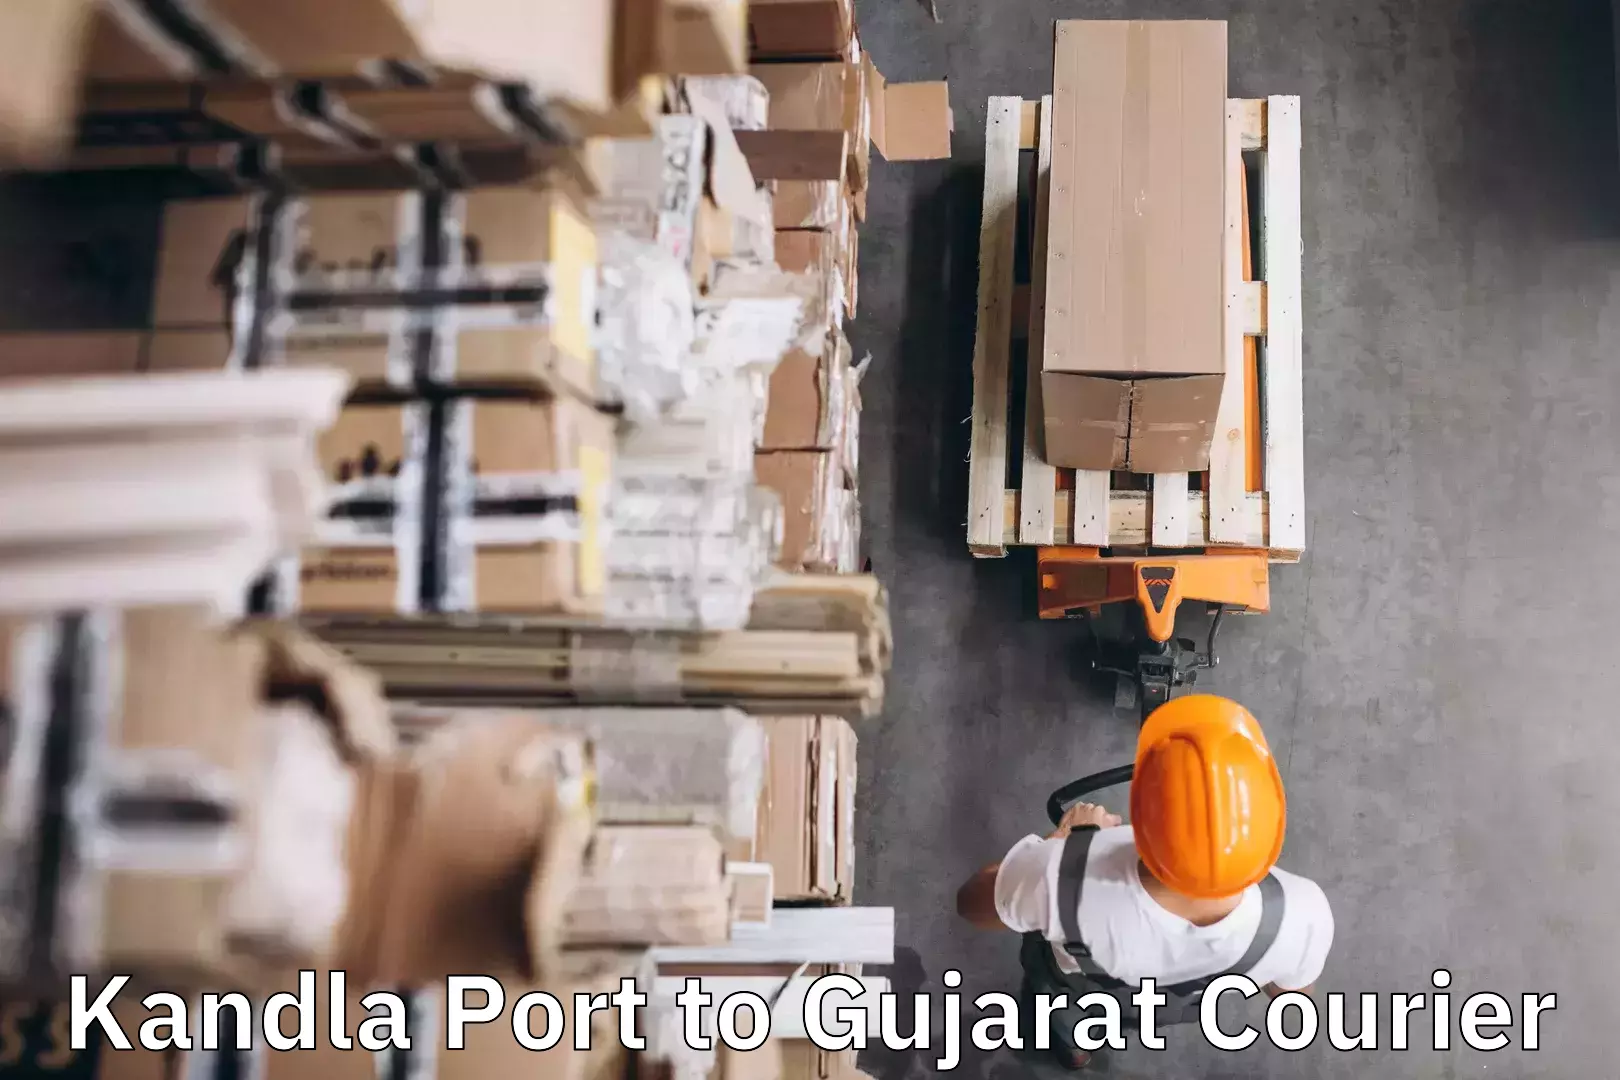 Luggage transport consulting in Kandla Port to Ahmedabad